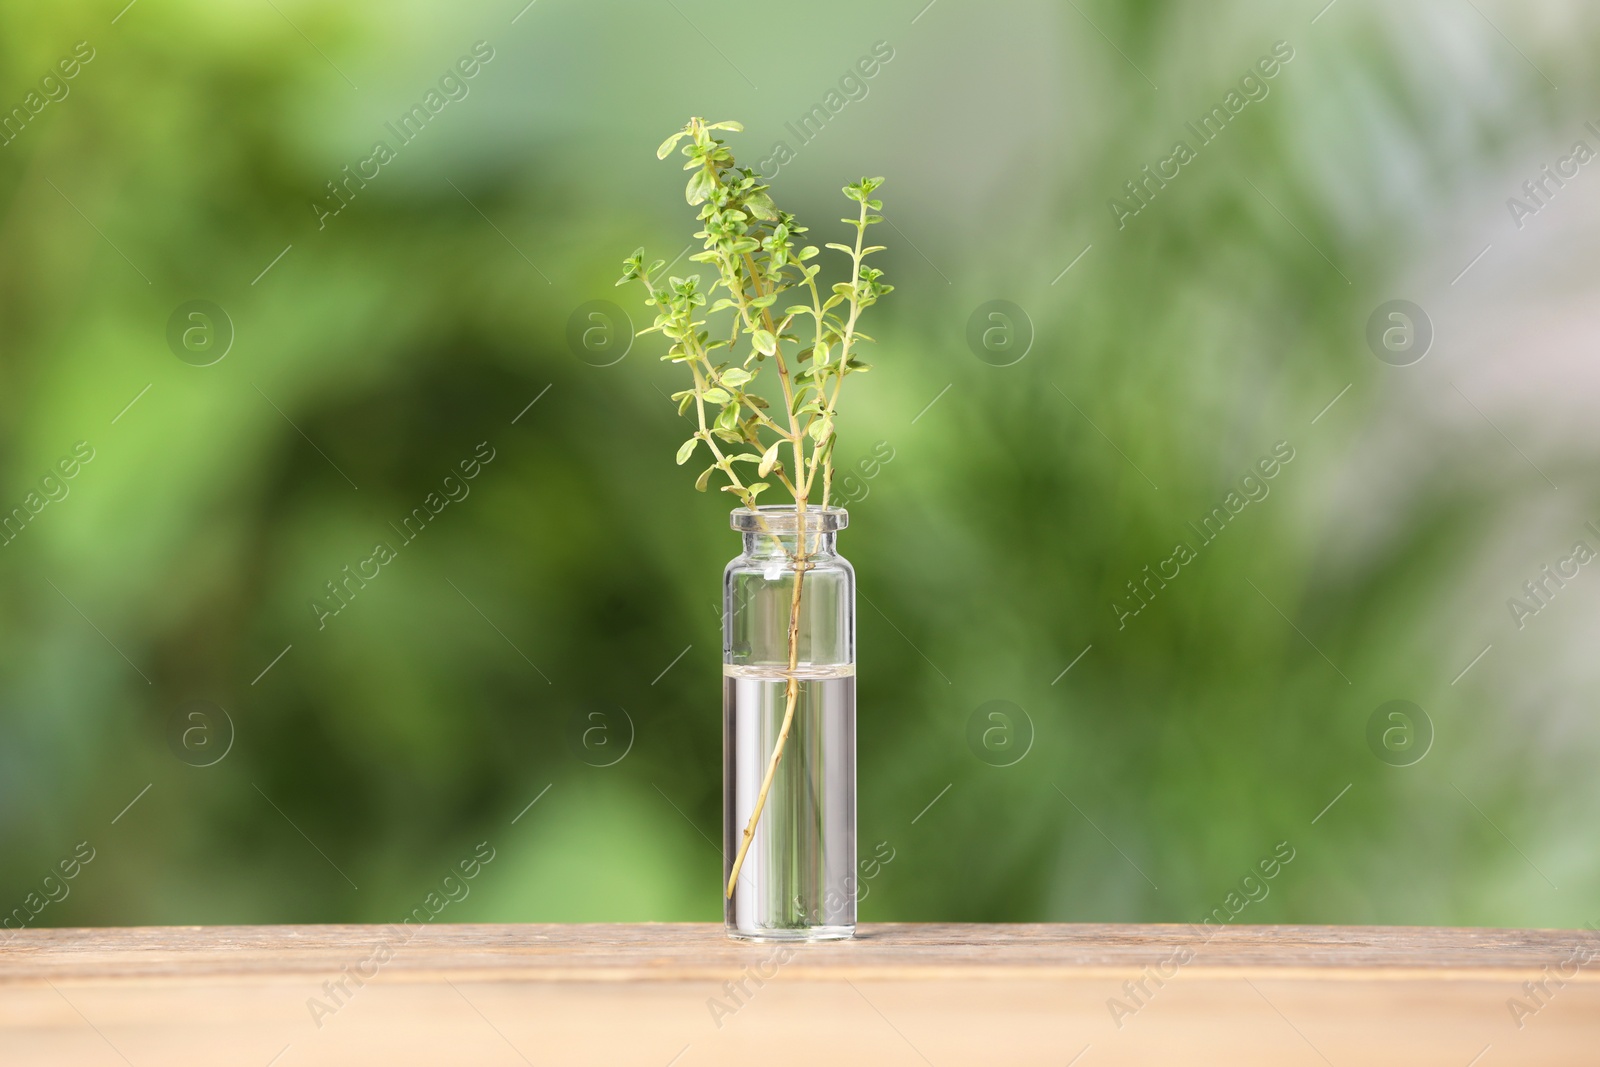 Photo of One bottle with essential oil and thyme on wooden table against blurred green background